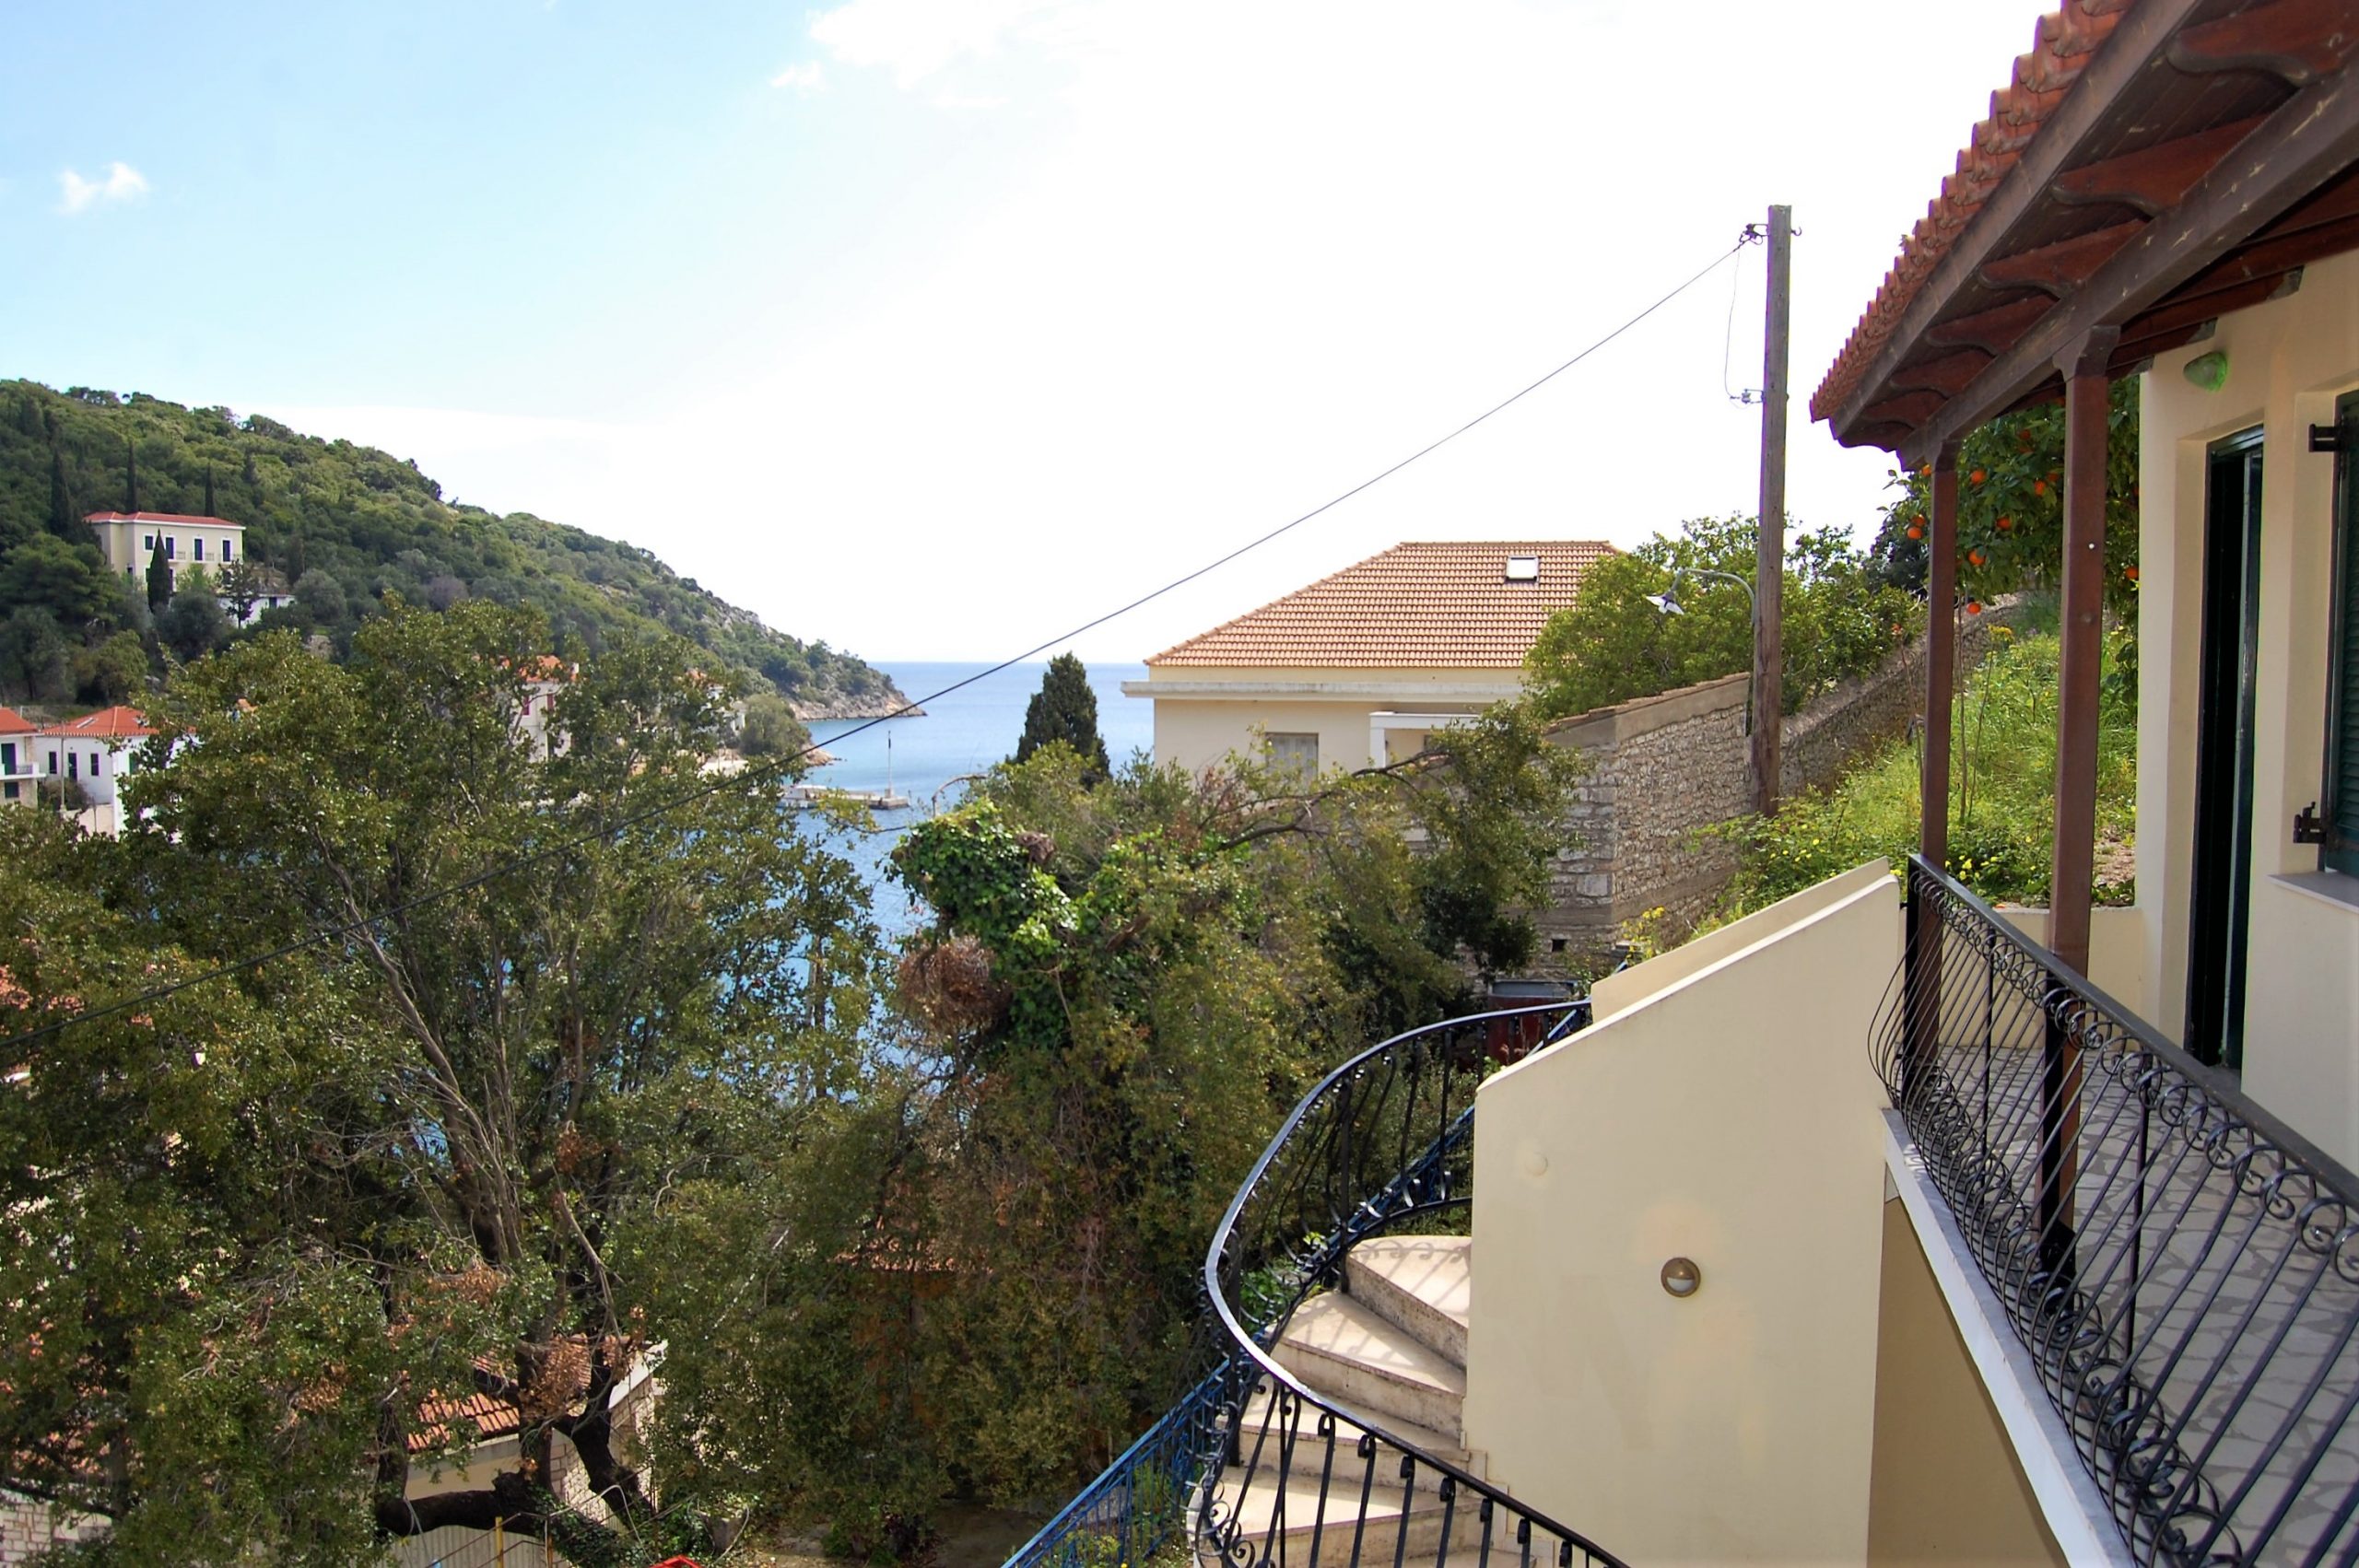 Balcony views of apartment complex and house for sale in Ithaca Greece, Kioni